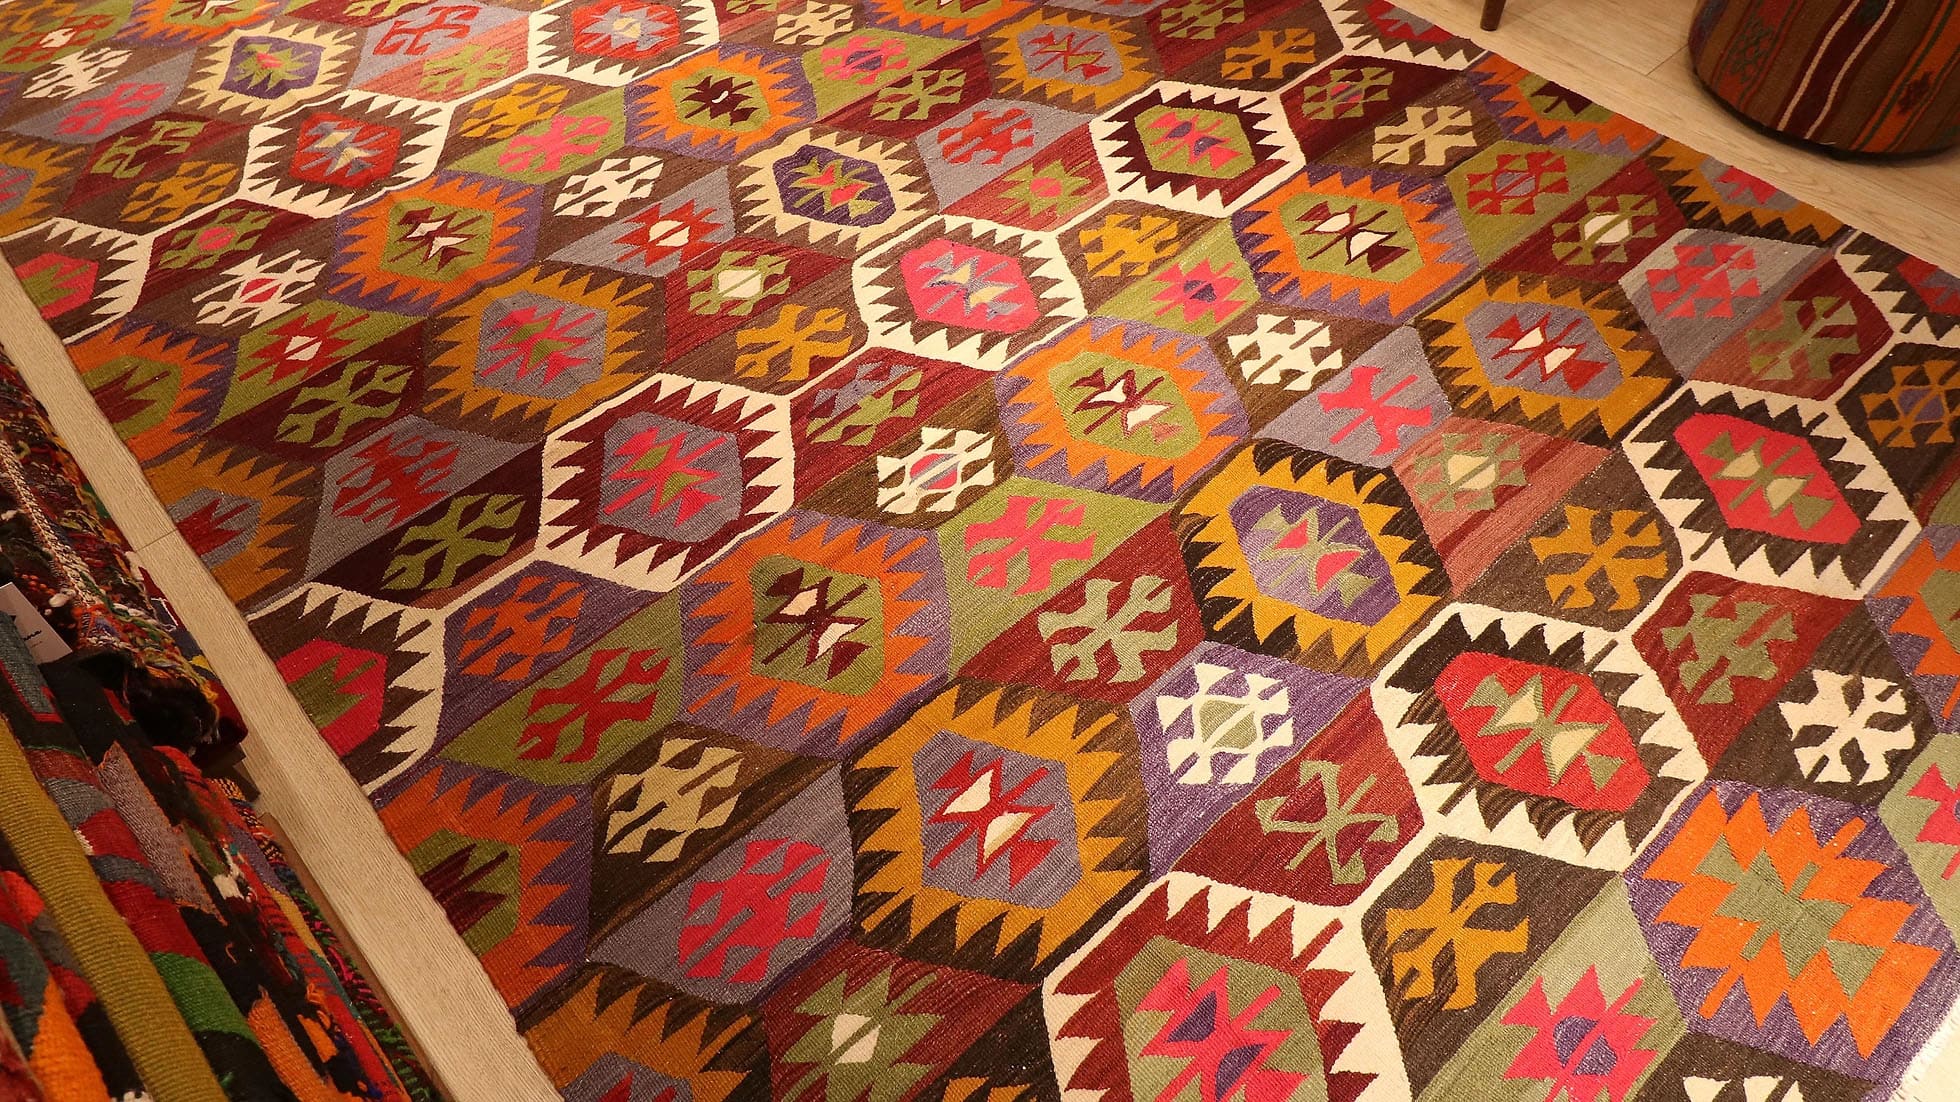 Mid-Century Rug in Tribal and Geometric Patterns Measuring 6x10